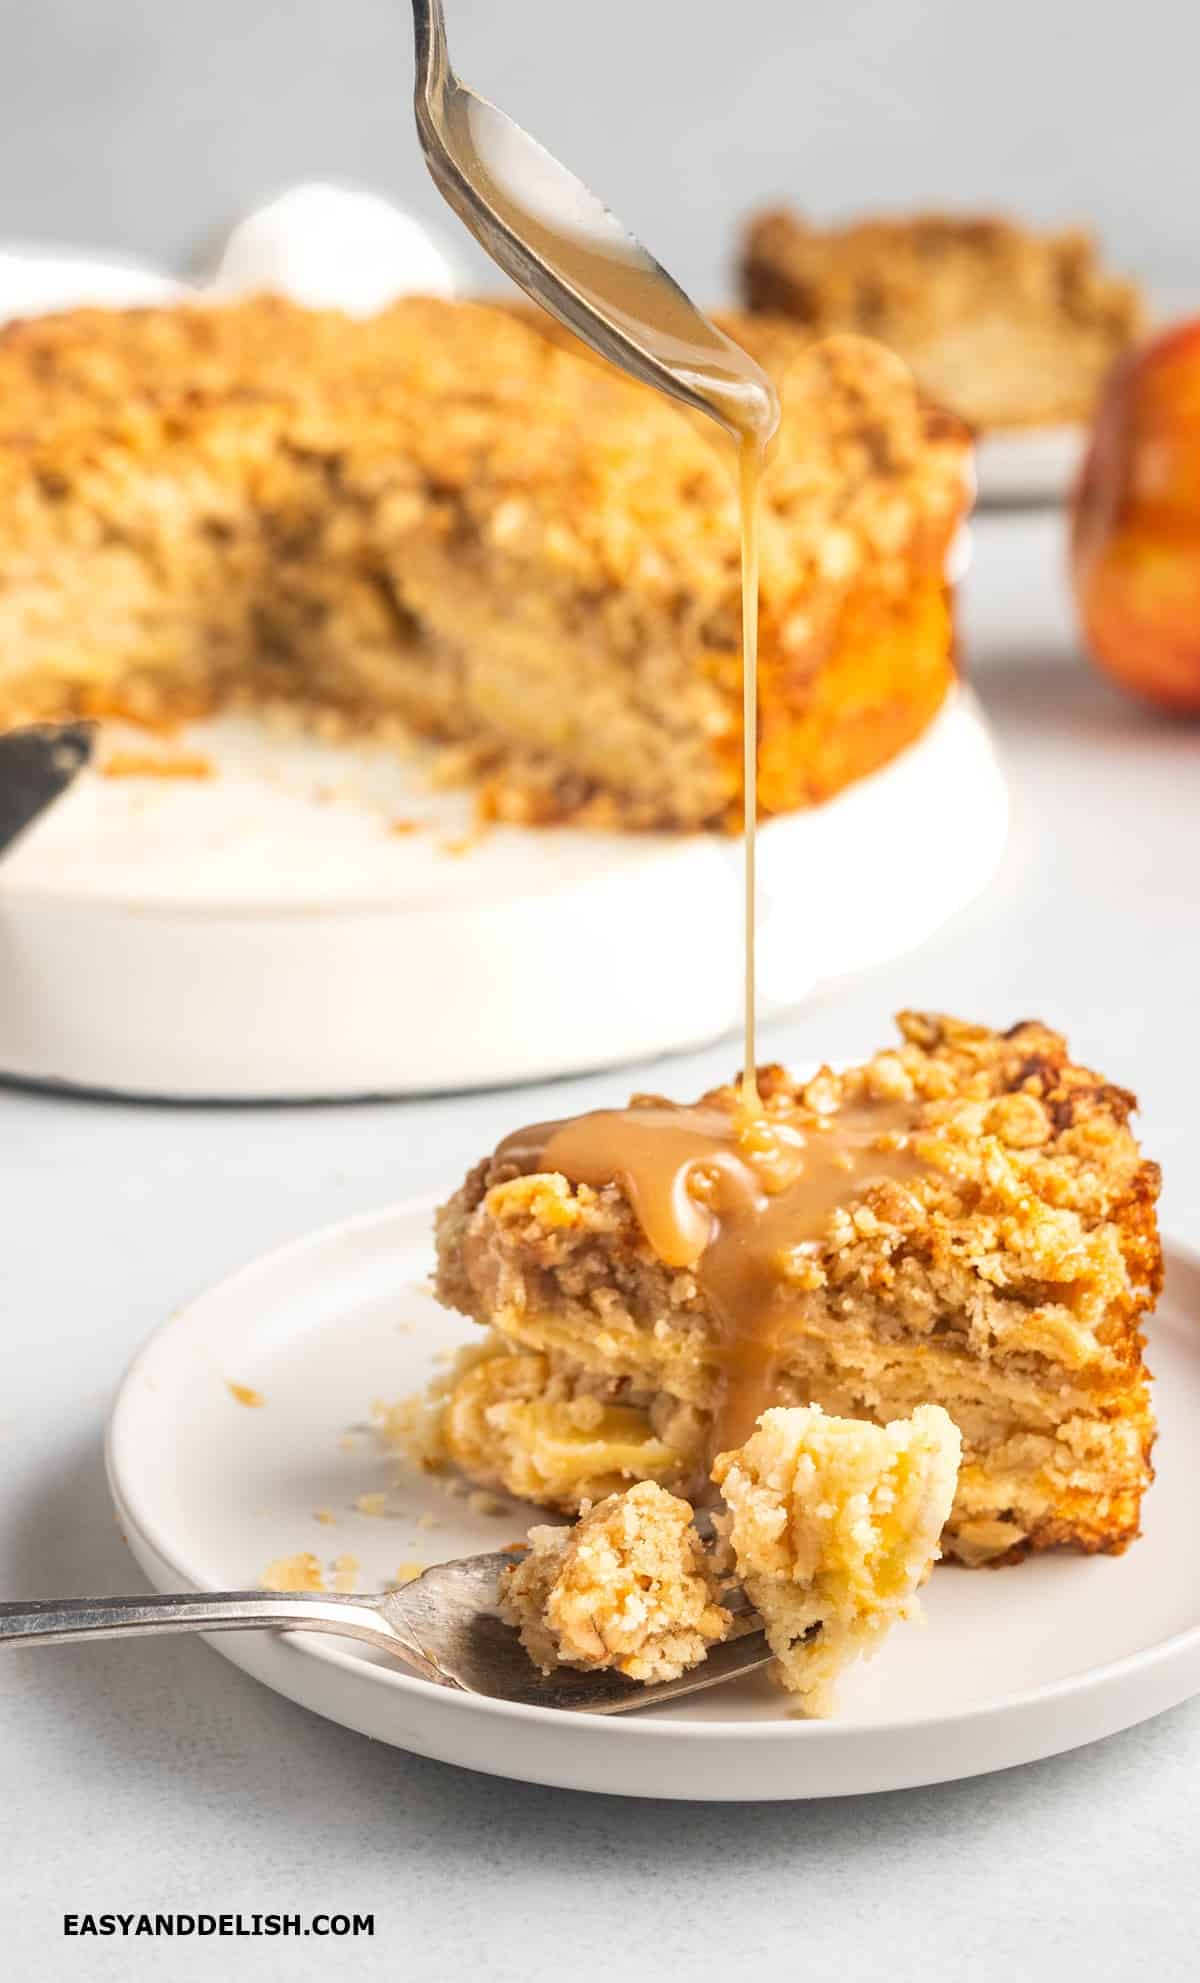 sppon of caramel drizzled over a slice of apple streusel cake. 